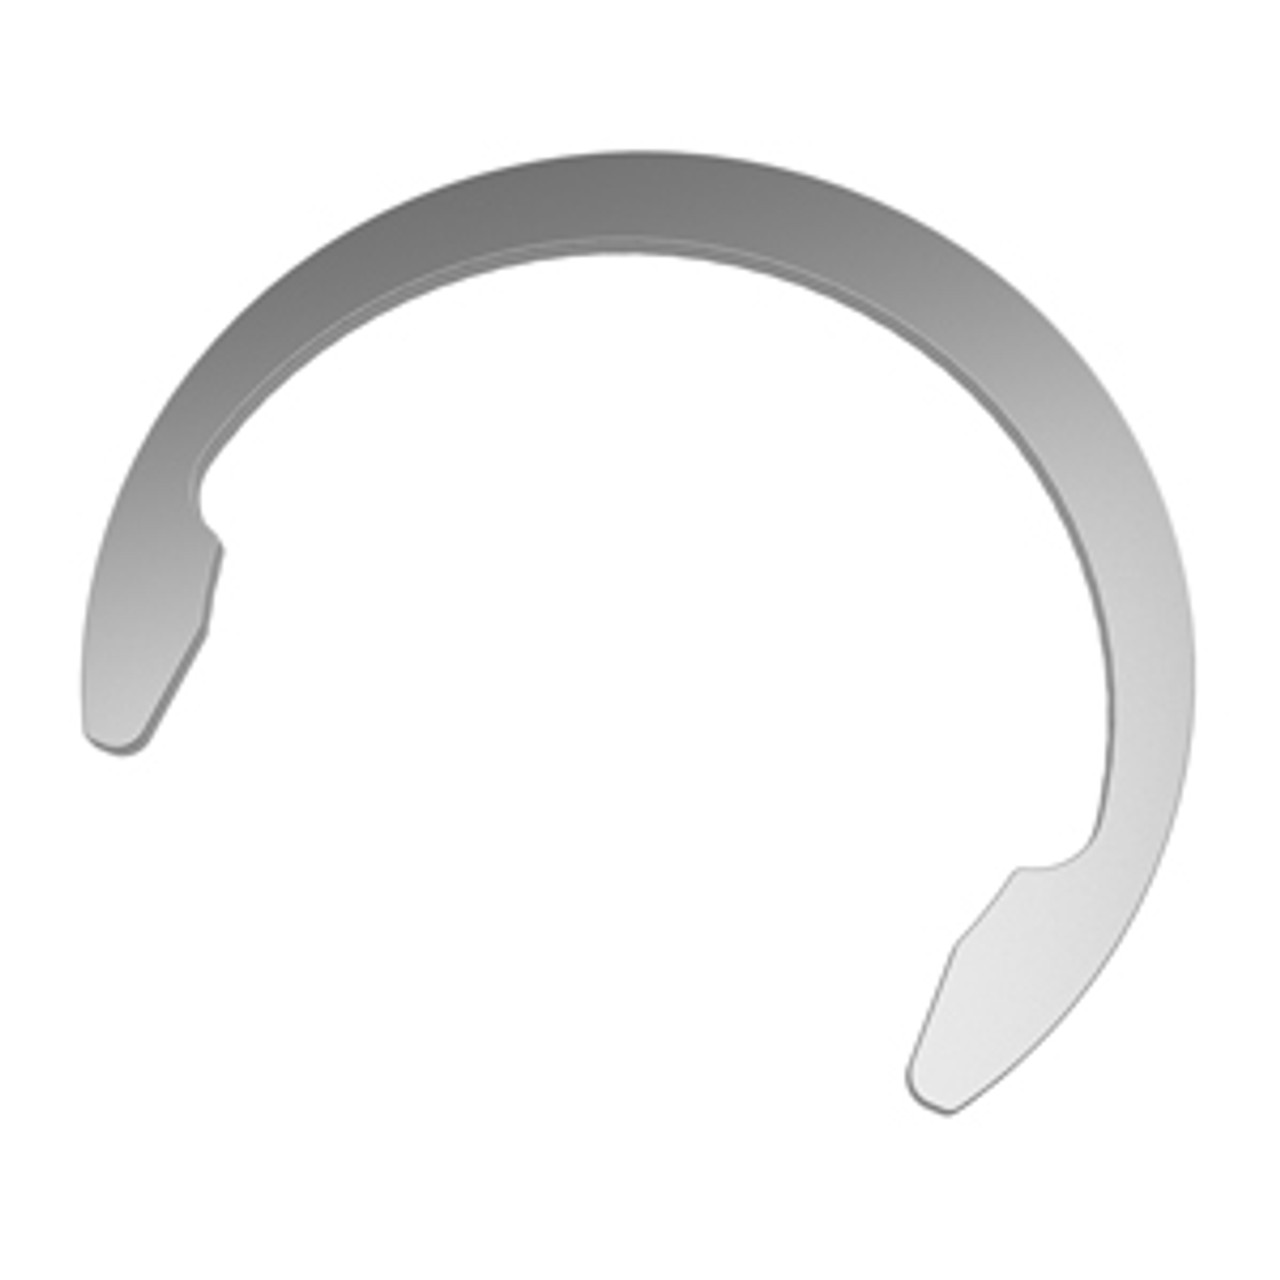 External Metric Phosphated Low Profile Crescent Retaining Ring  DC-028-PA